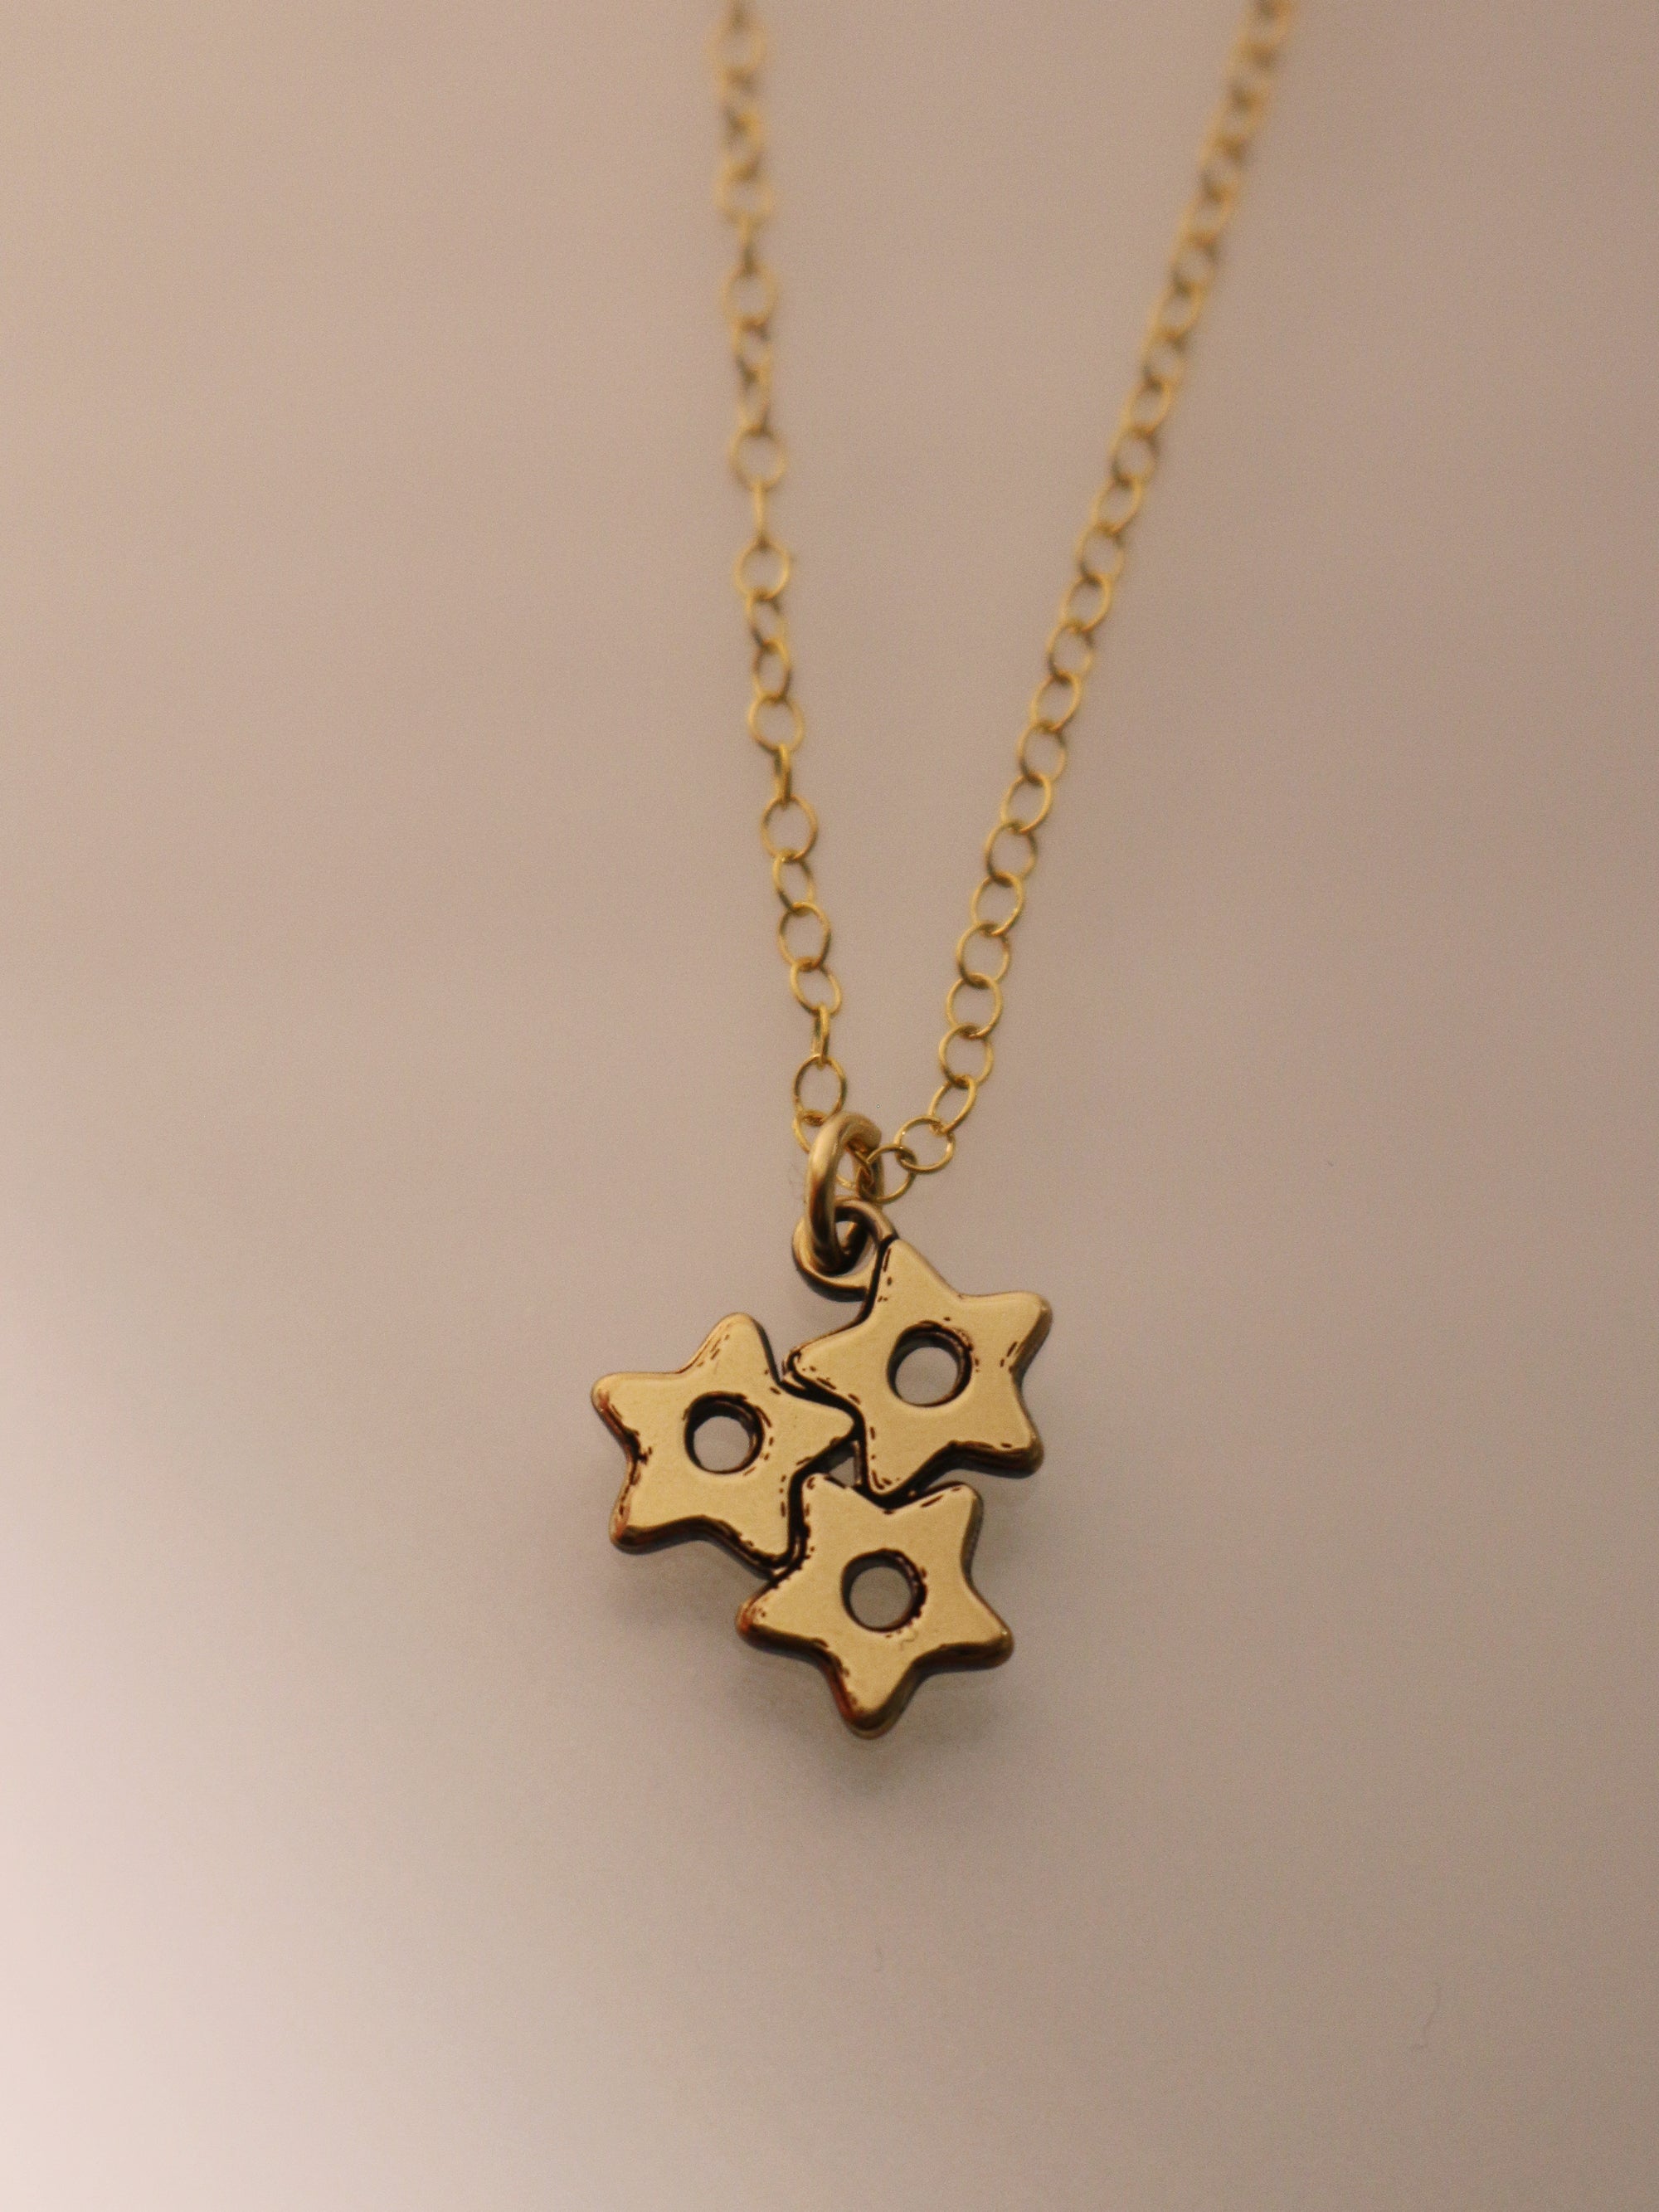 Star Pastina Pasta Necklace - Gold Filled